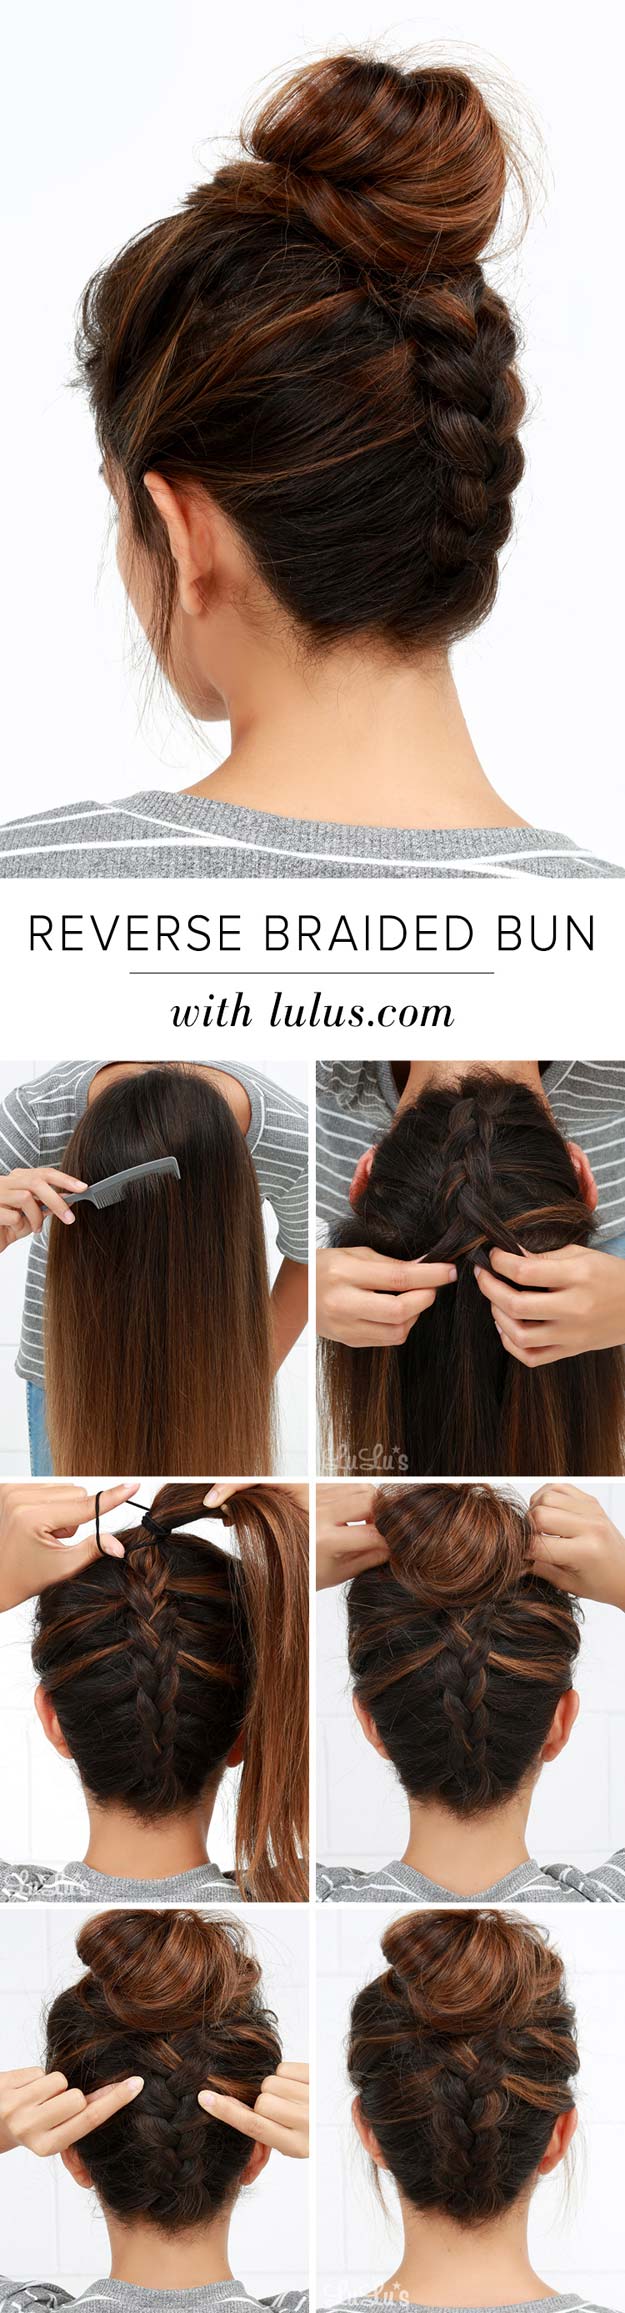 Best Hair Braiding Tutorials - Reverse Braided Bun Hair Tutorial - Easy Step by Step Tutorials for Braids - How To Braid Fishtail, French Braids, Flower Crown, Side Braids, Cornrows, Updos - Cool Braided Hairstyles for Girls, Teens and Women - School, Day and Evening, Boho, Casual and Formal Looks #hairstyles #braiding #braidingtutorials #diyhair 